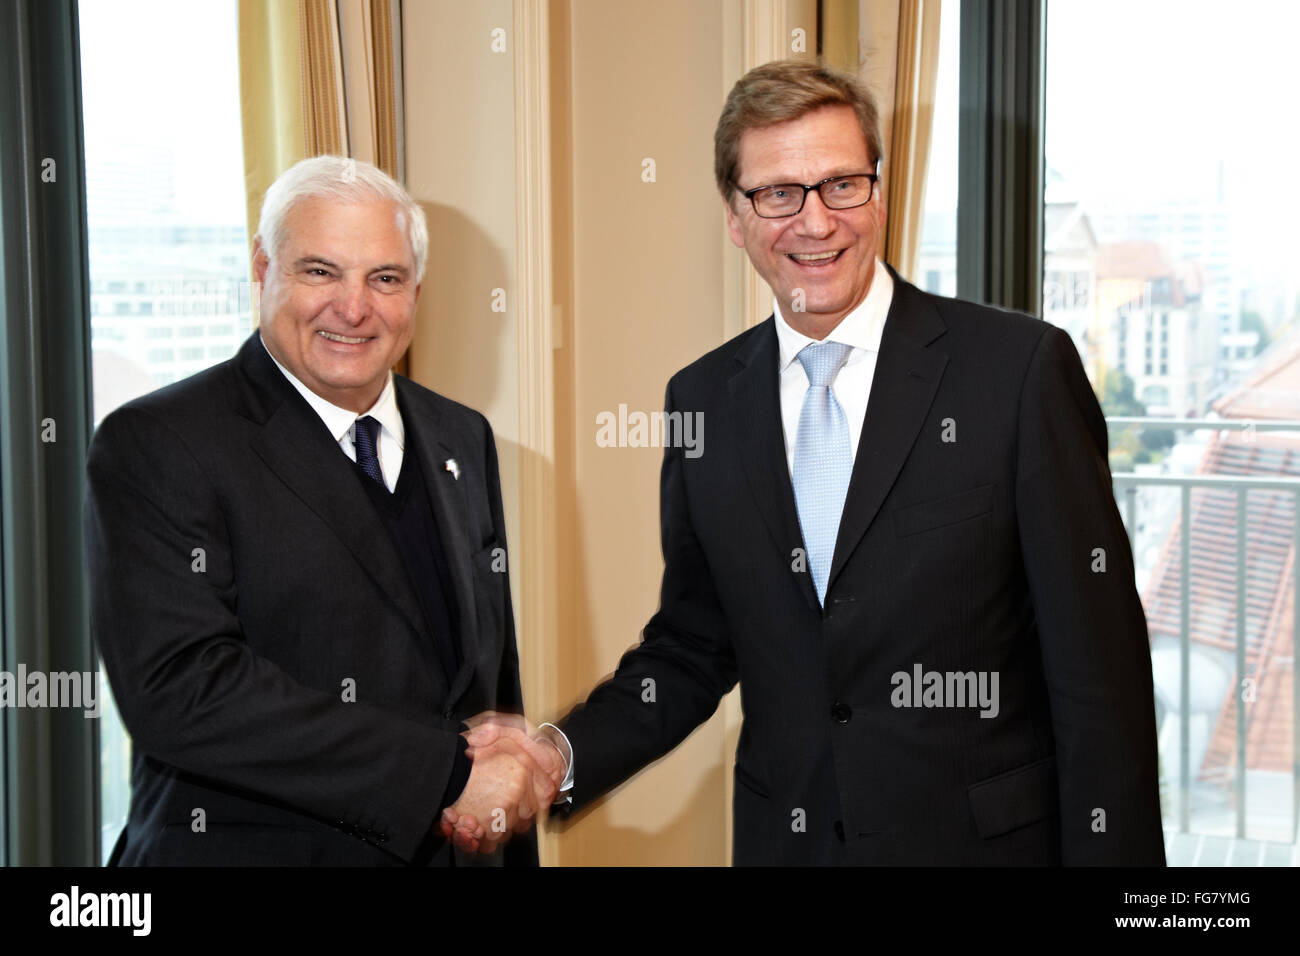 President of Panama and FM Guido Westerwelle Stock Photo